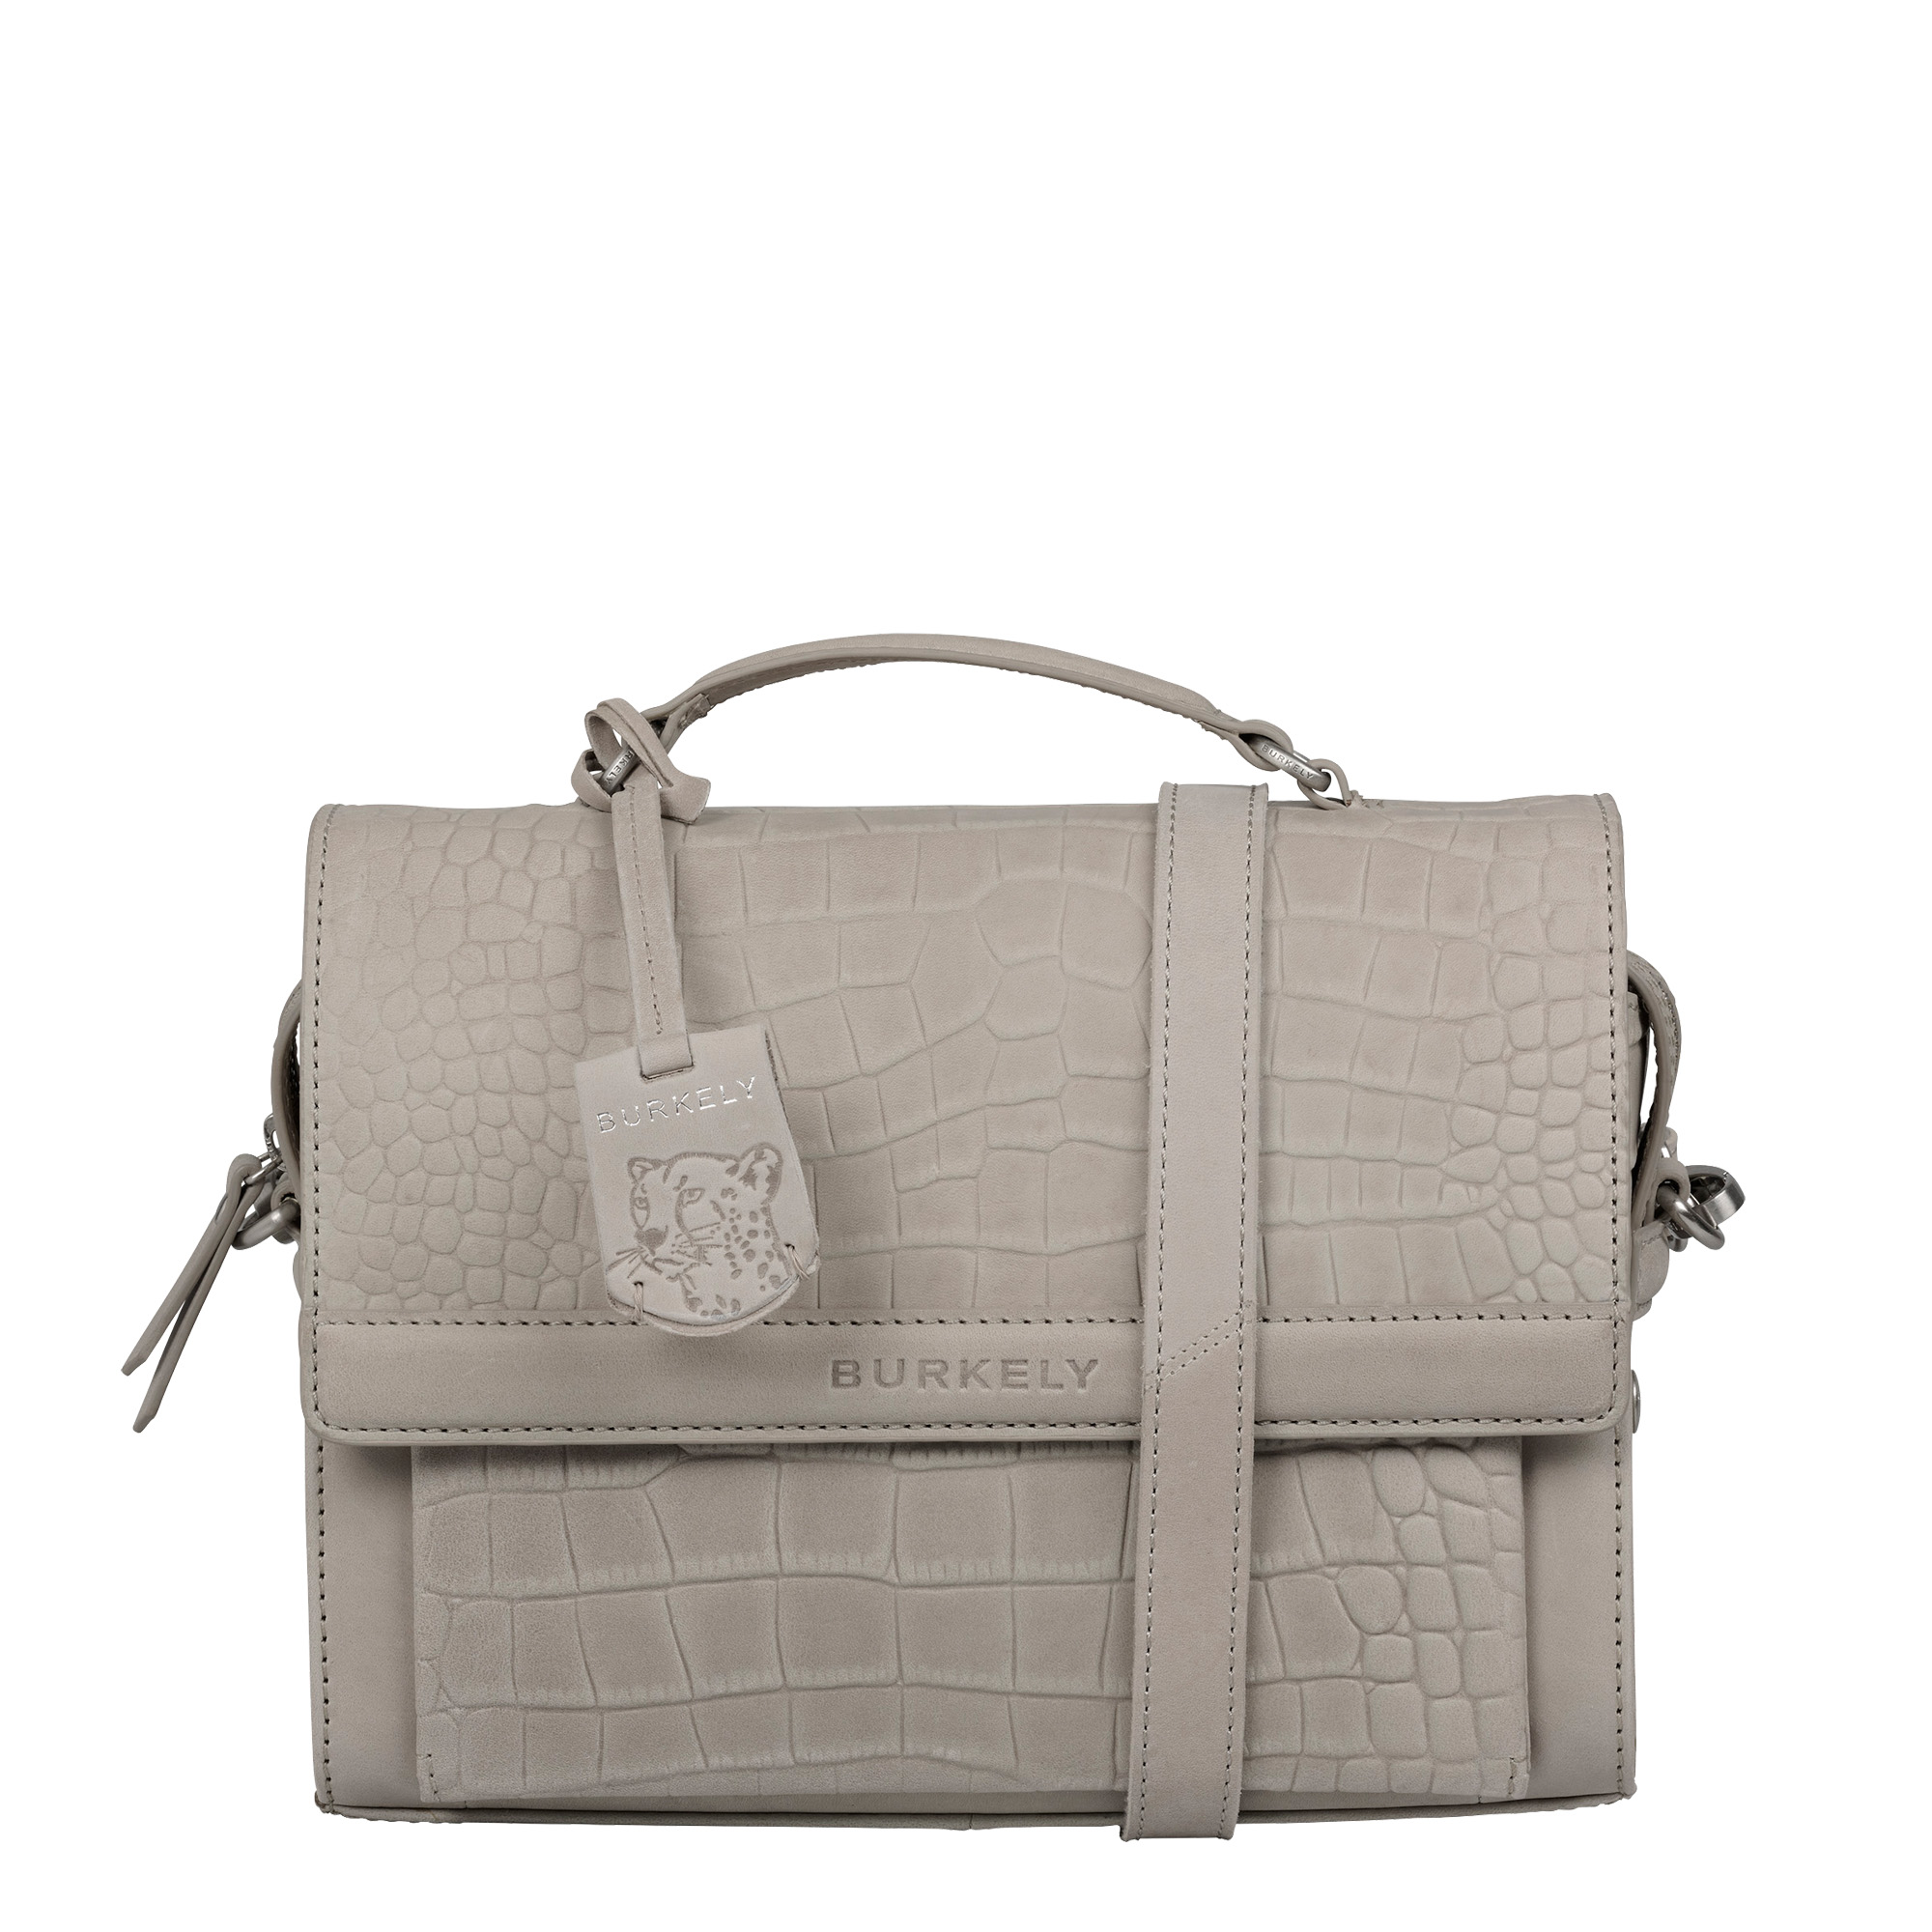 BURKELY CASUAL CAYLA CITYBAG